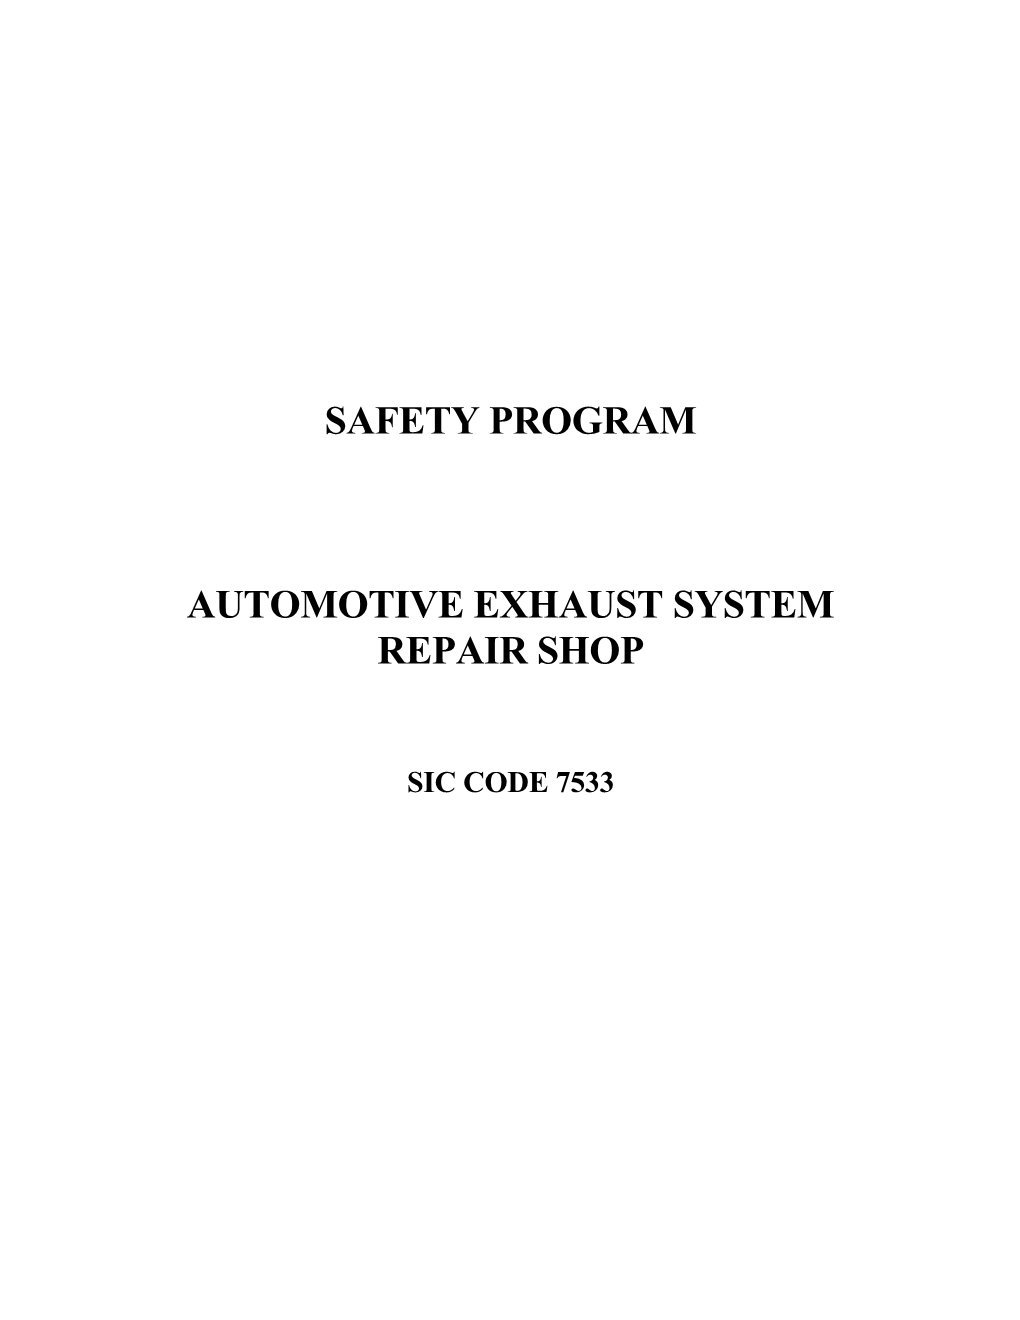 Auto Exhaust Systems Shop Safety Program